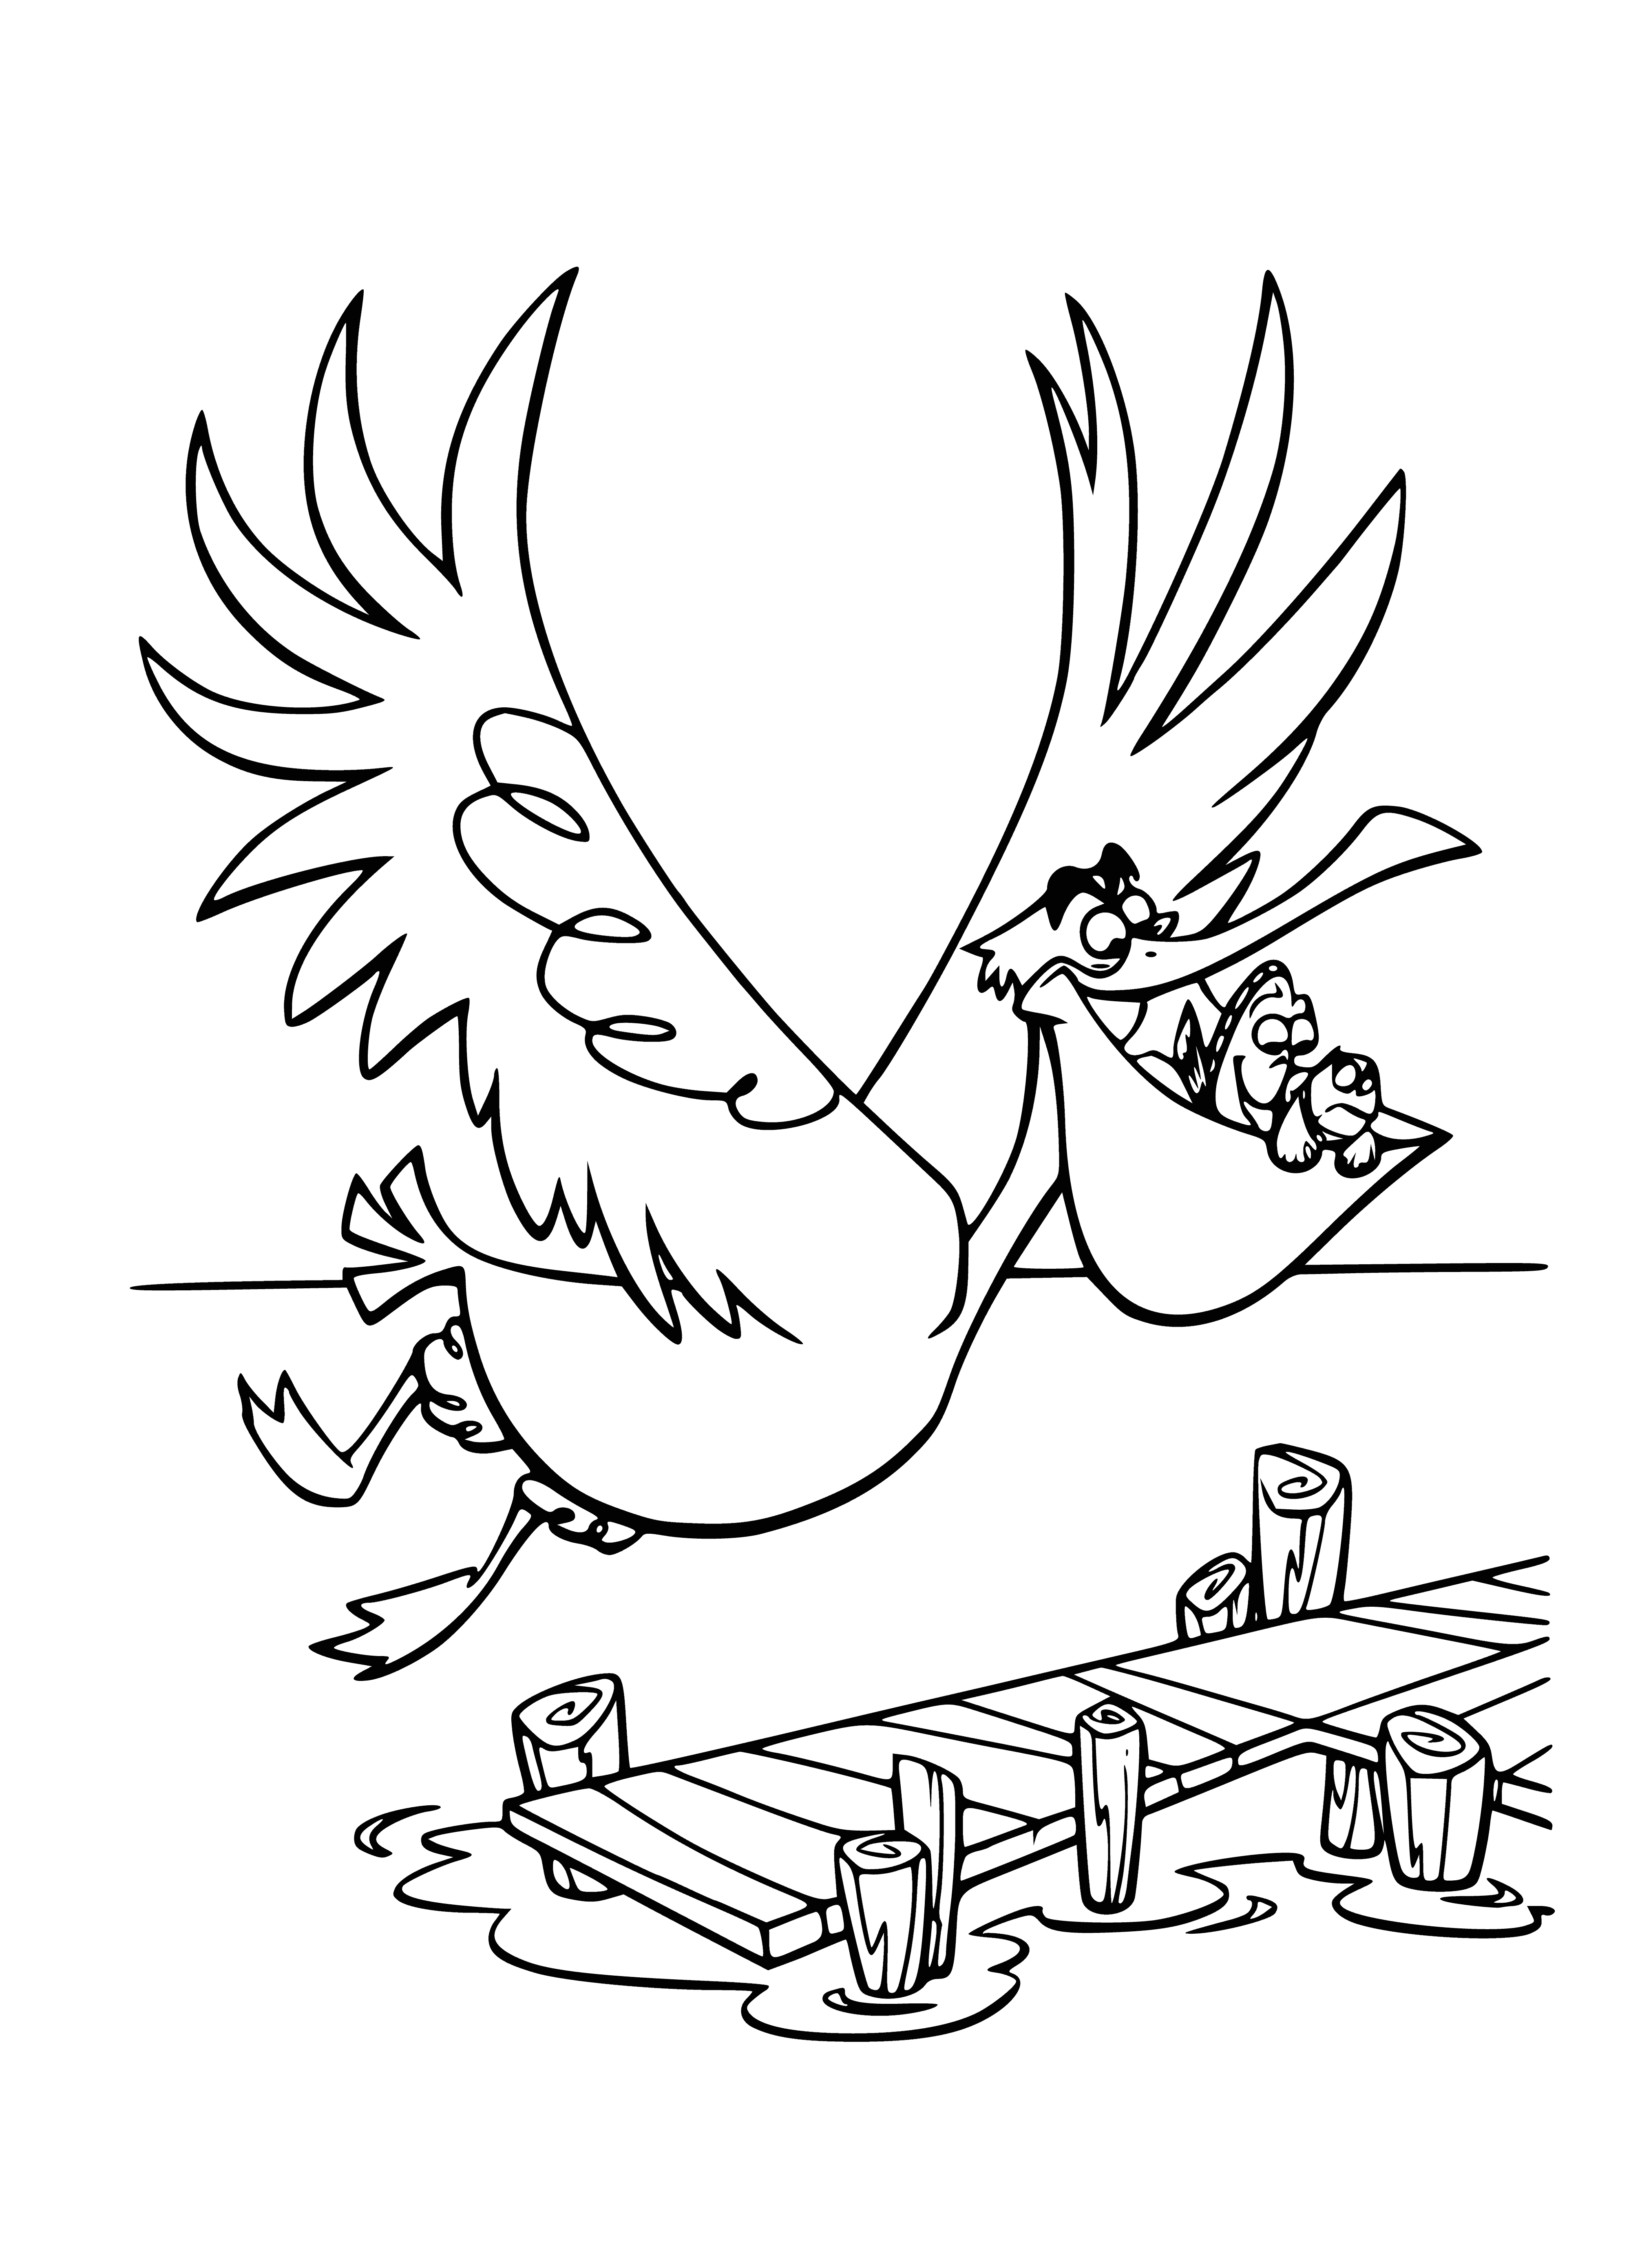 Pelican and fish coloring page